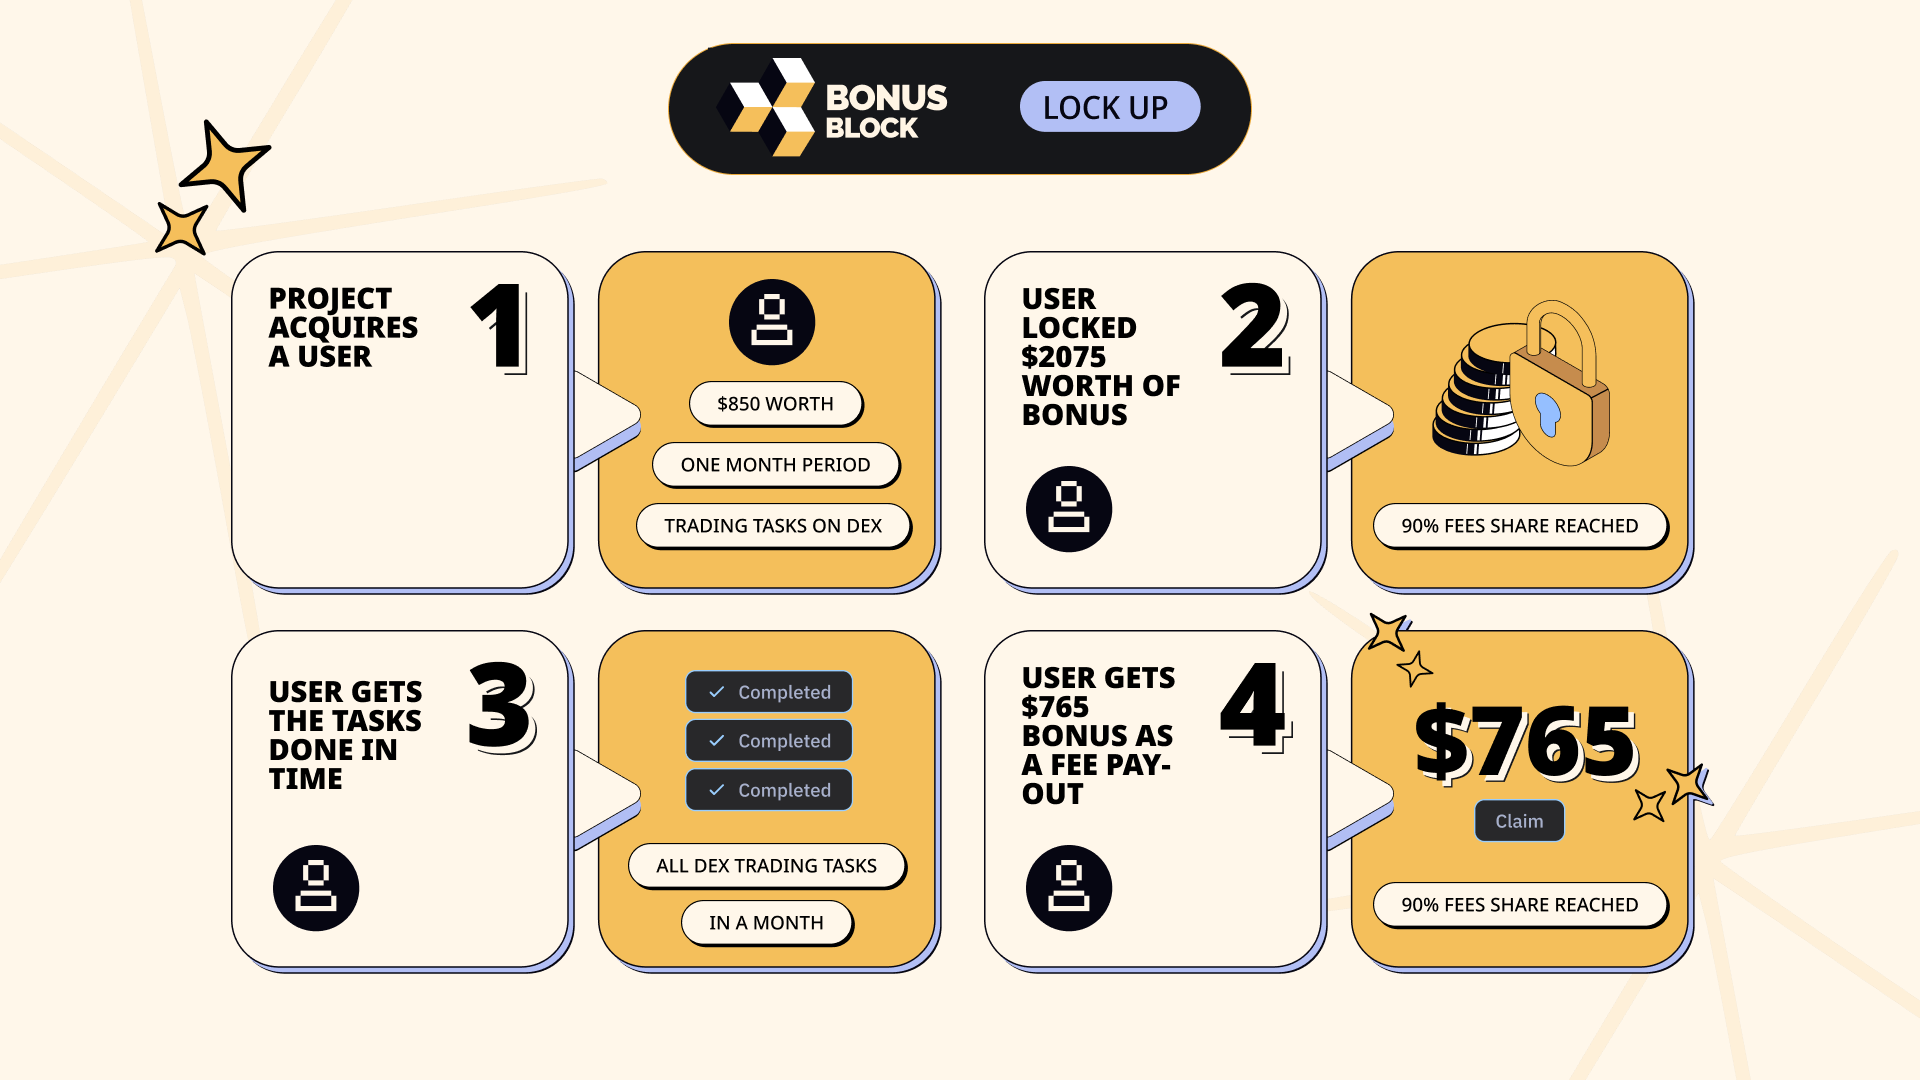 Infographic on the User Fee calculations depending on how much BONUS is locked in.